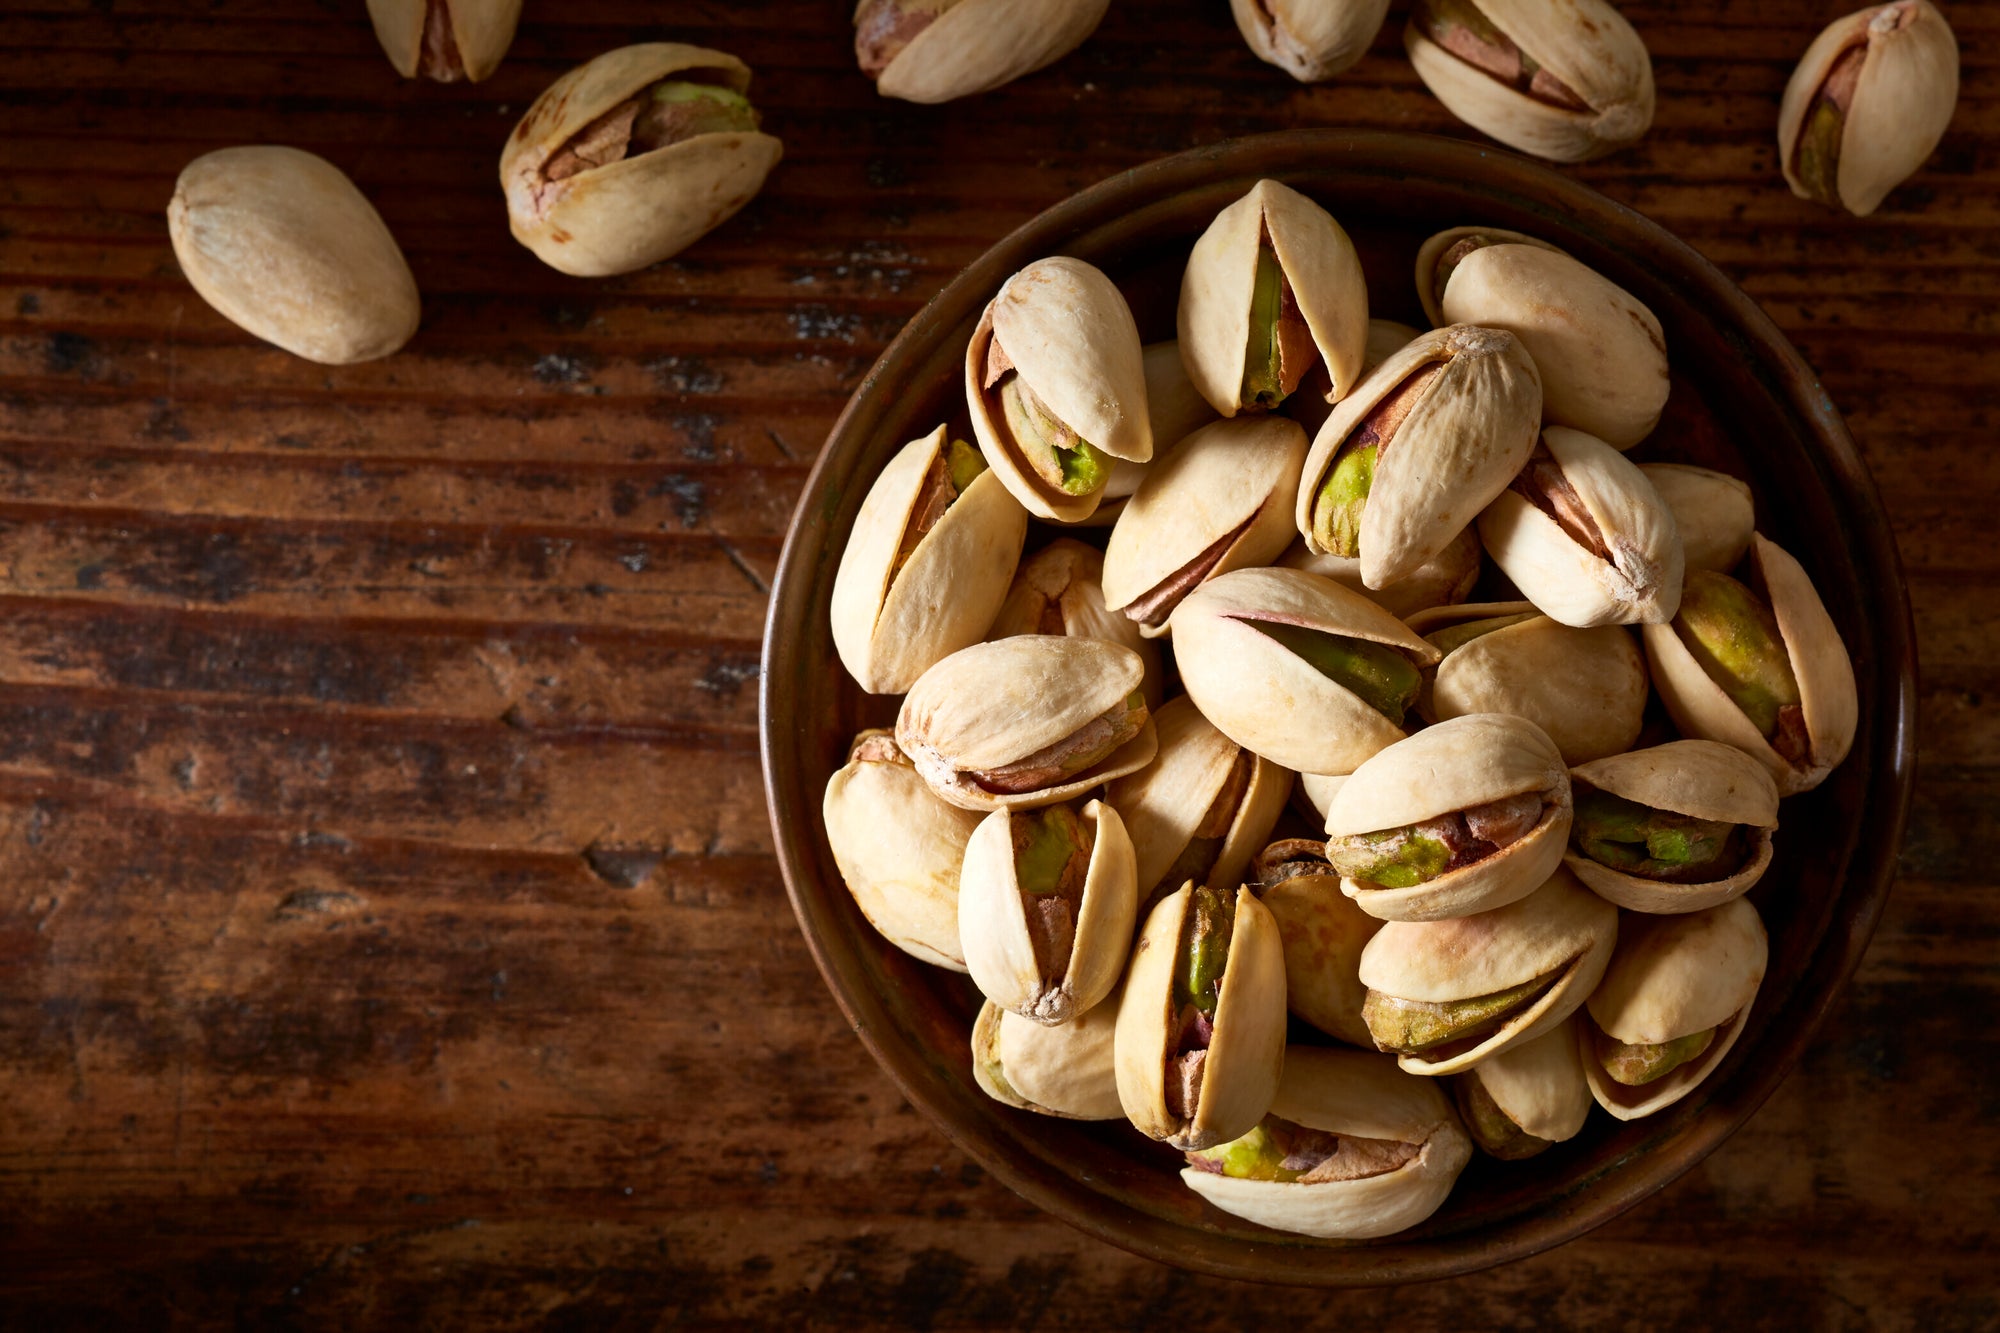 Philon Nuts Roasted Salted Pistachios